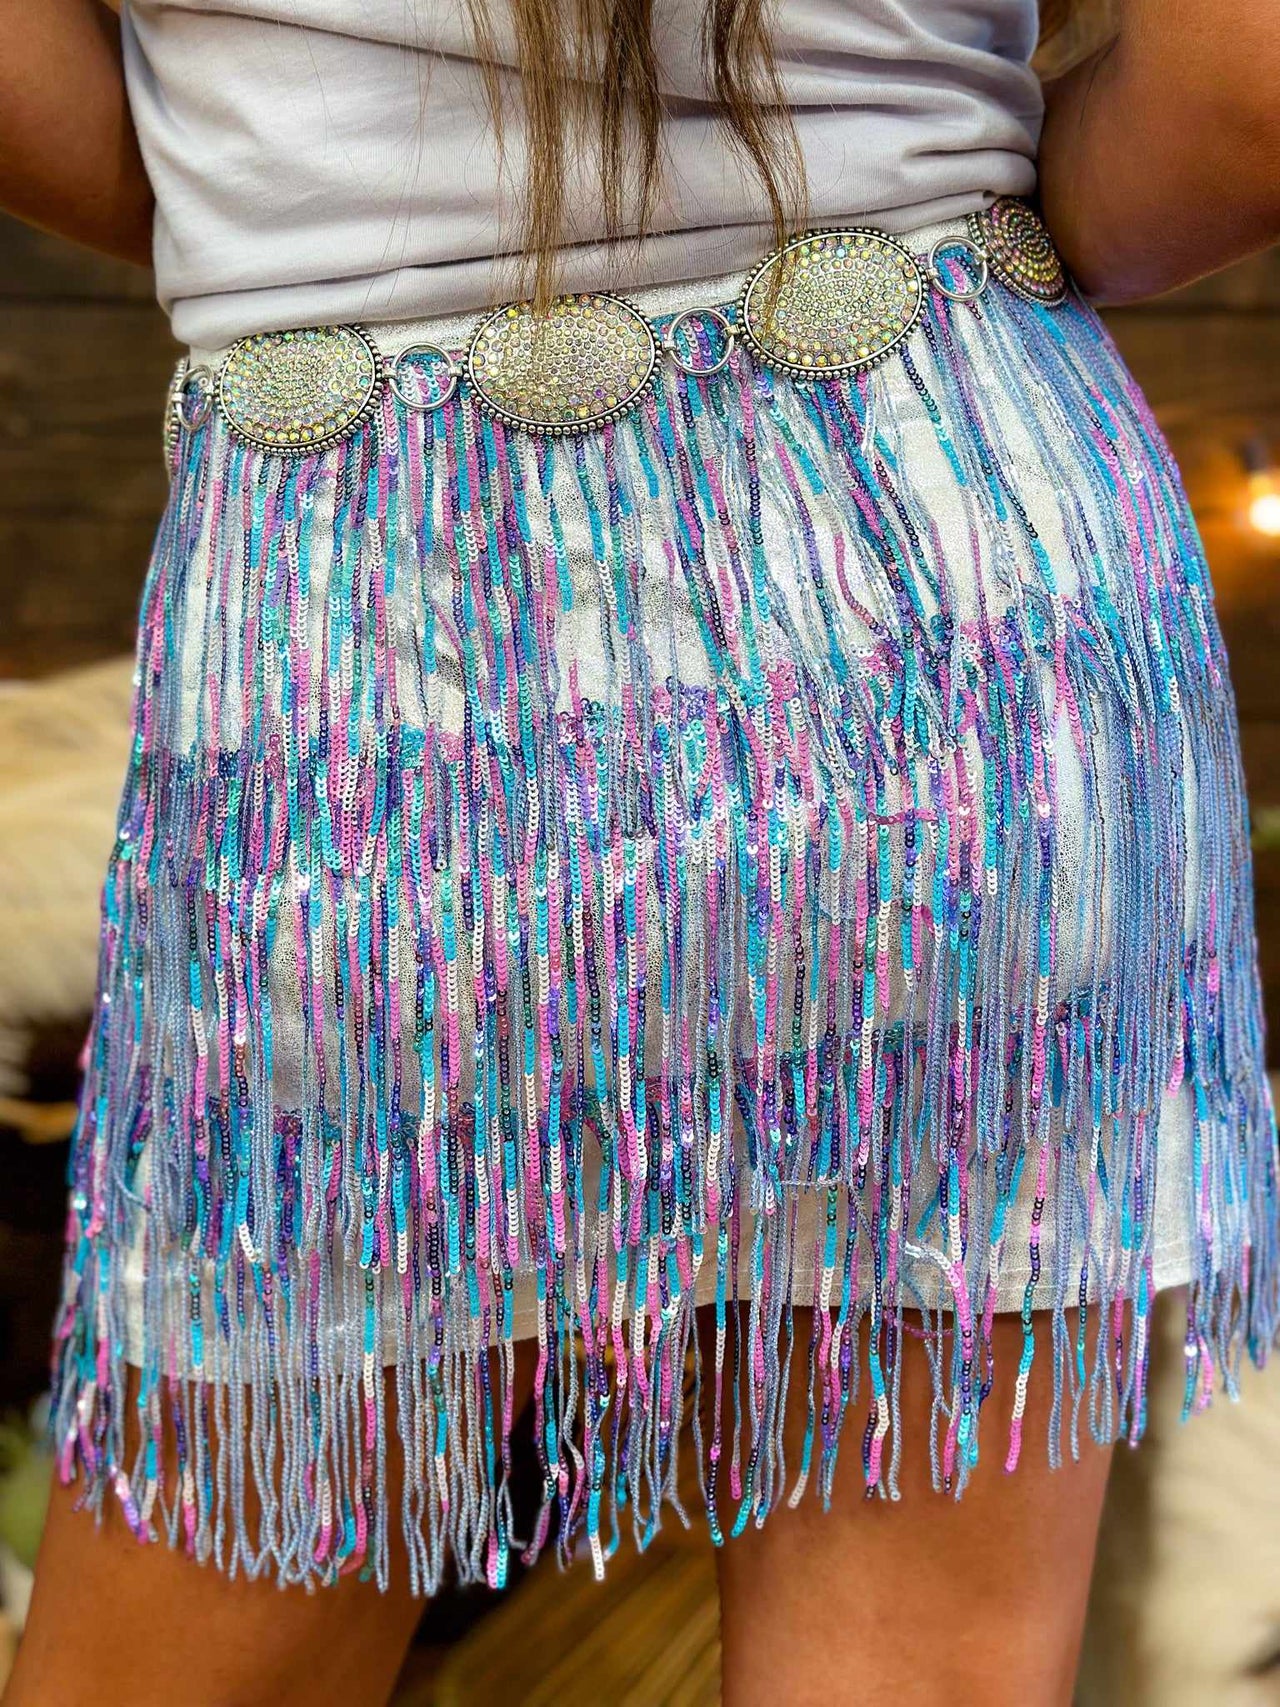 Sequin fringe tiered mini skirt in blue and purple.